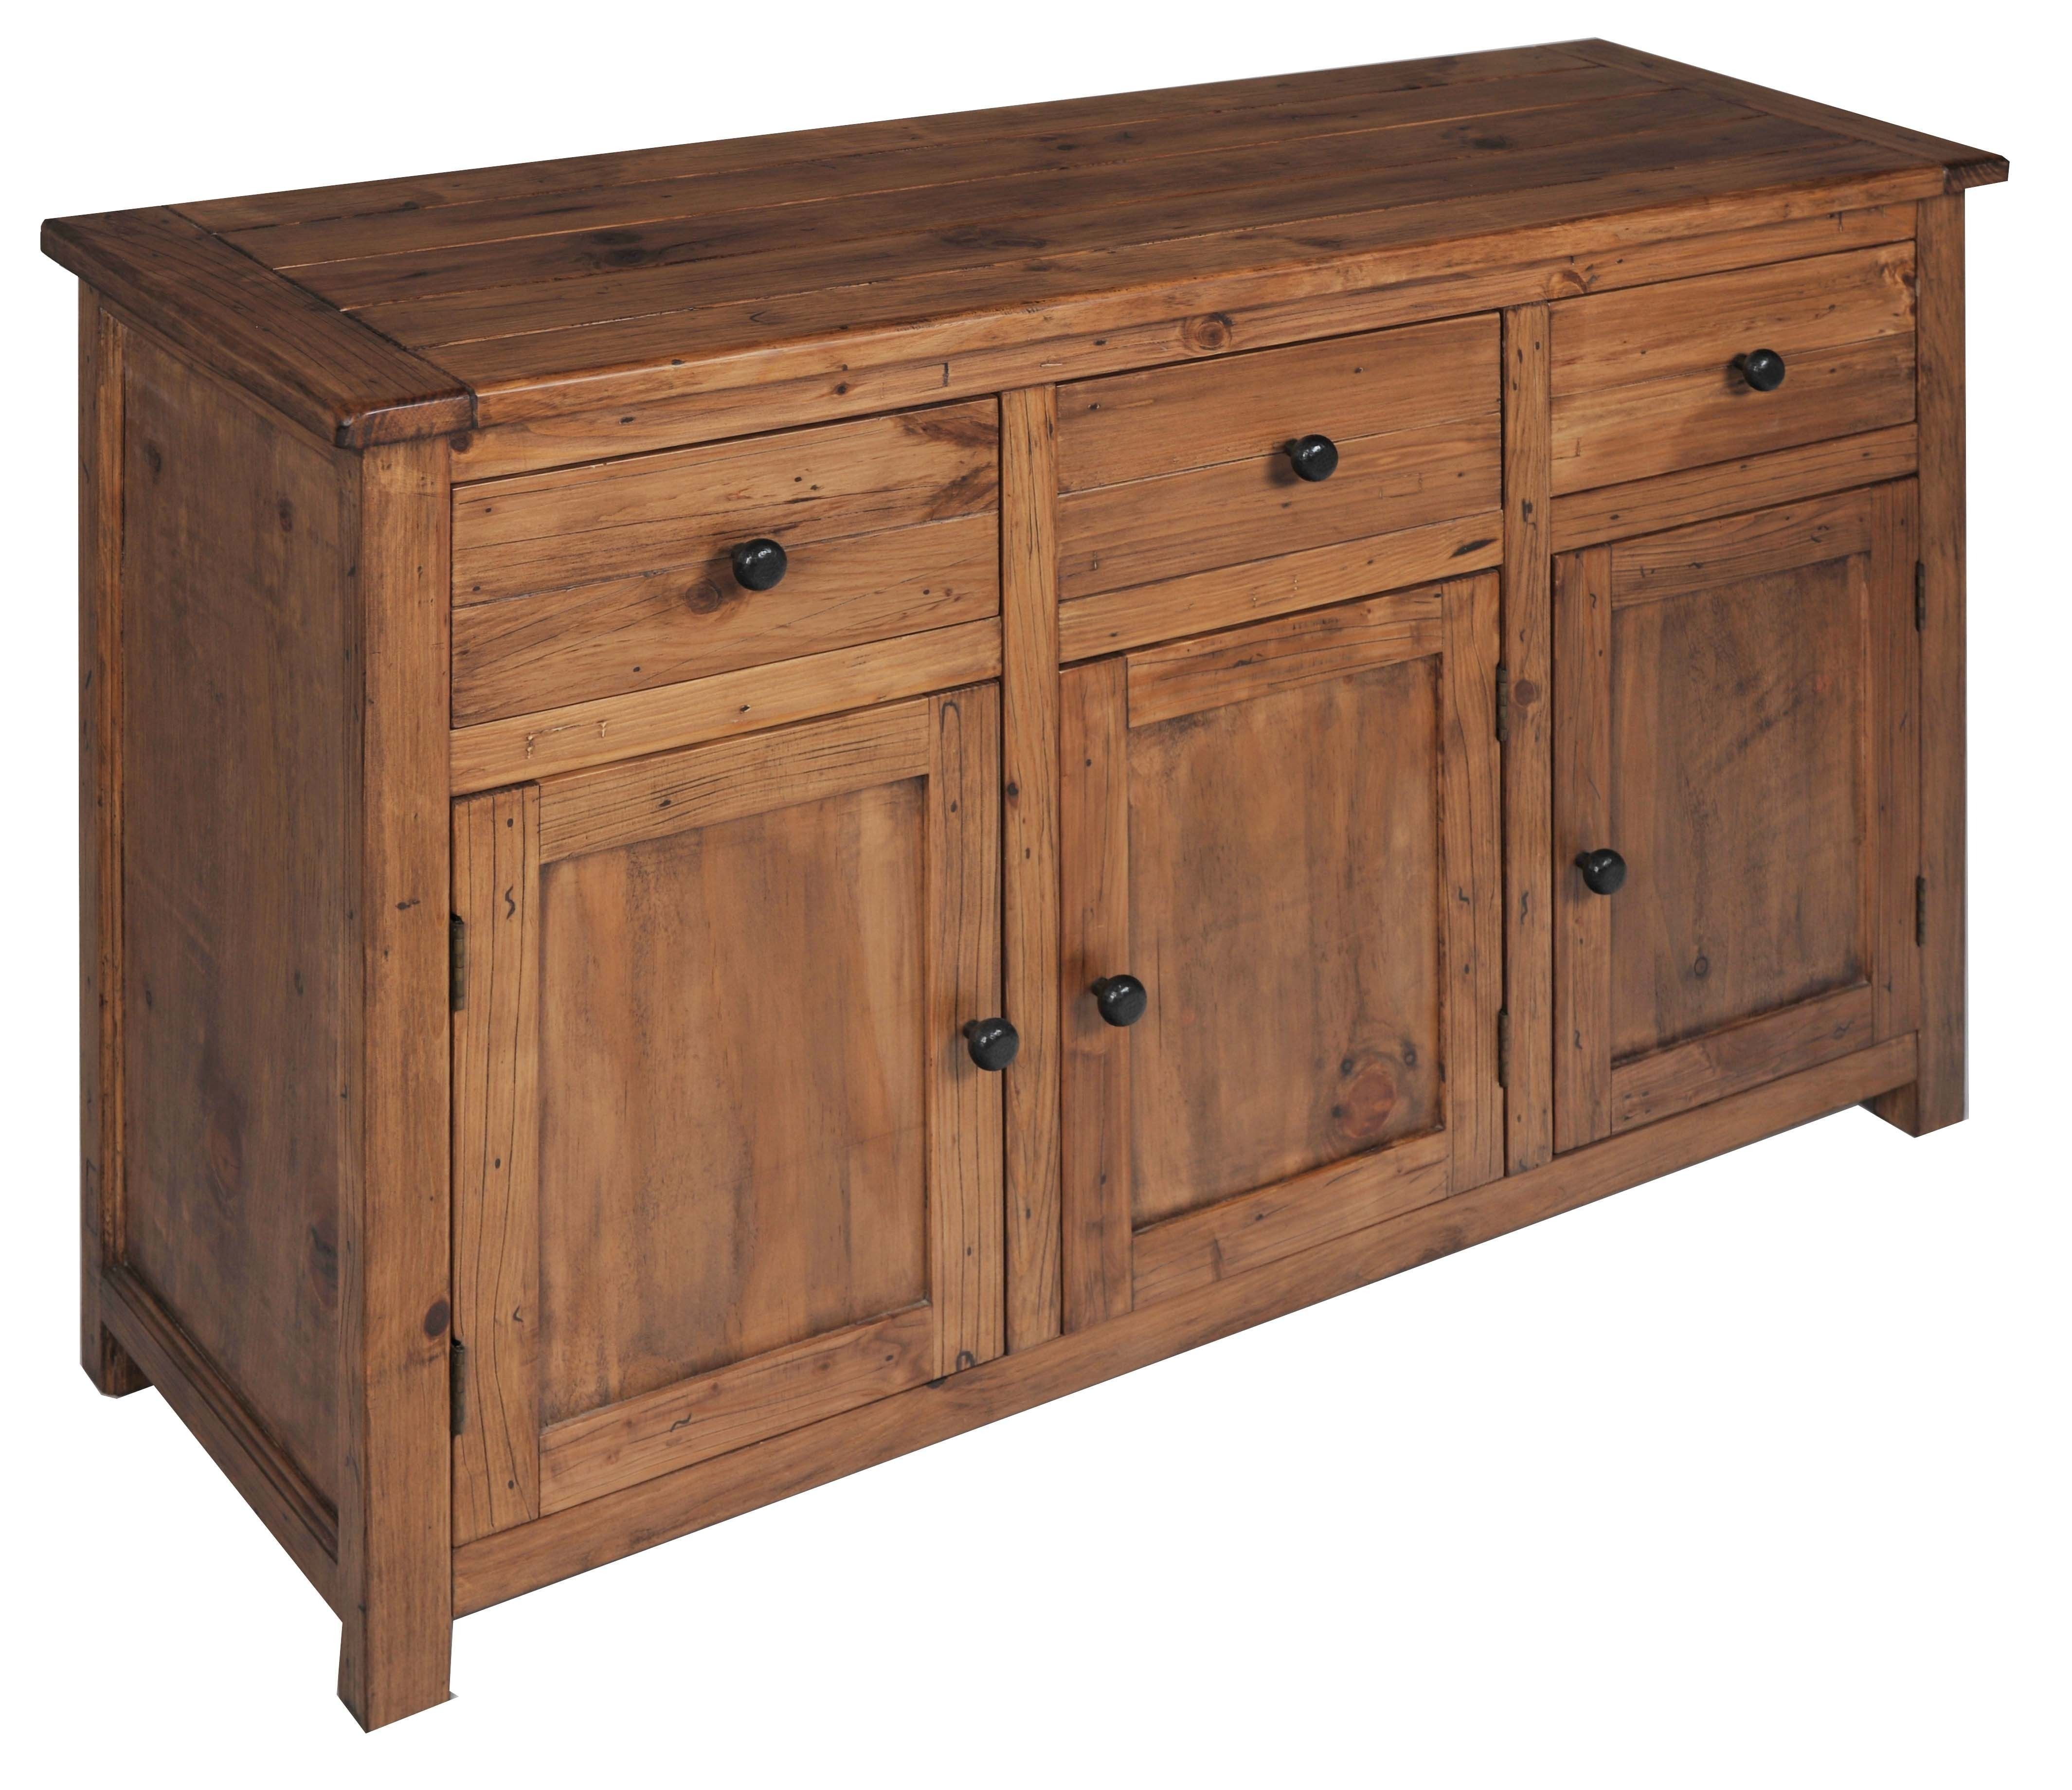 Denver Medium Sideboard 3 Door, 3 Drawer – A Balancing Stain Is Pertaining To Most Popular Aged Pine 3 Drawer 2 Door Sideboards (View 10 of 20)